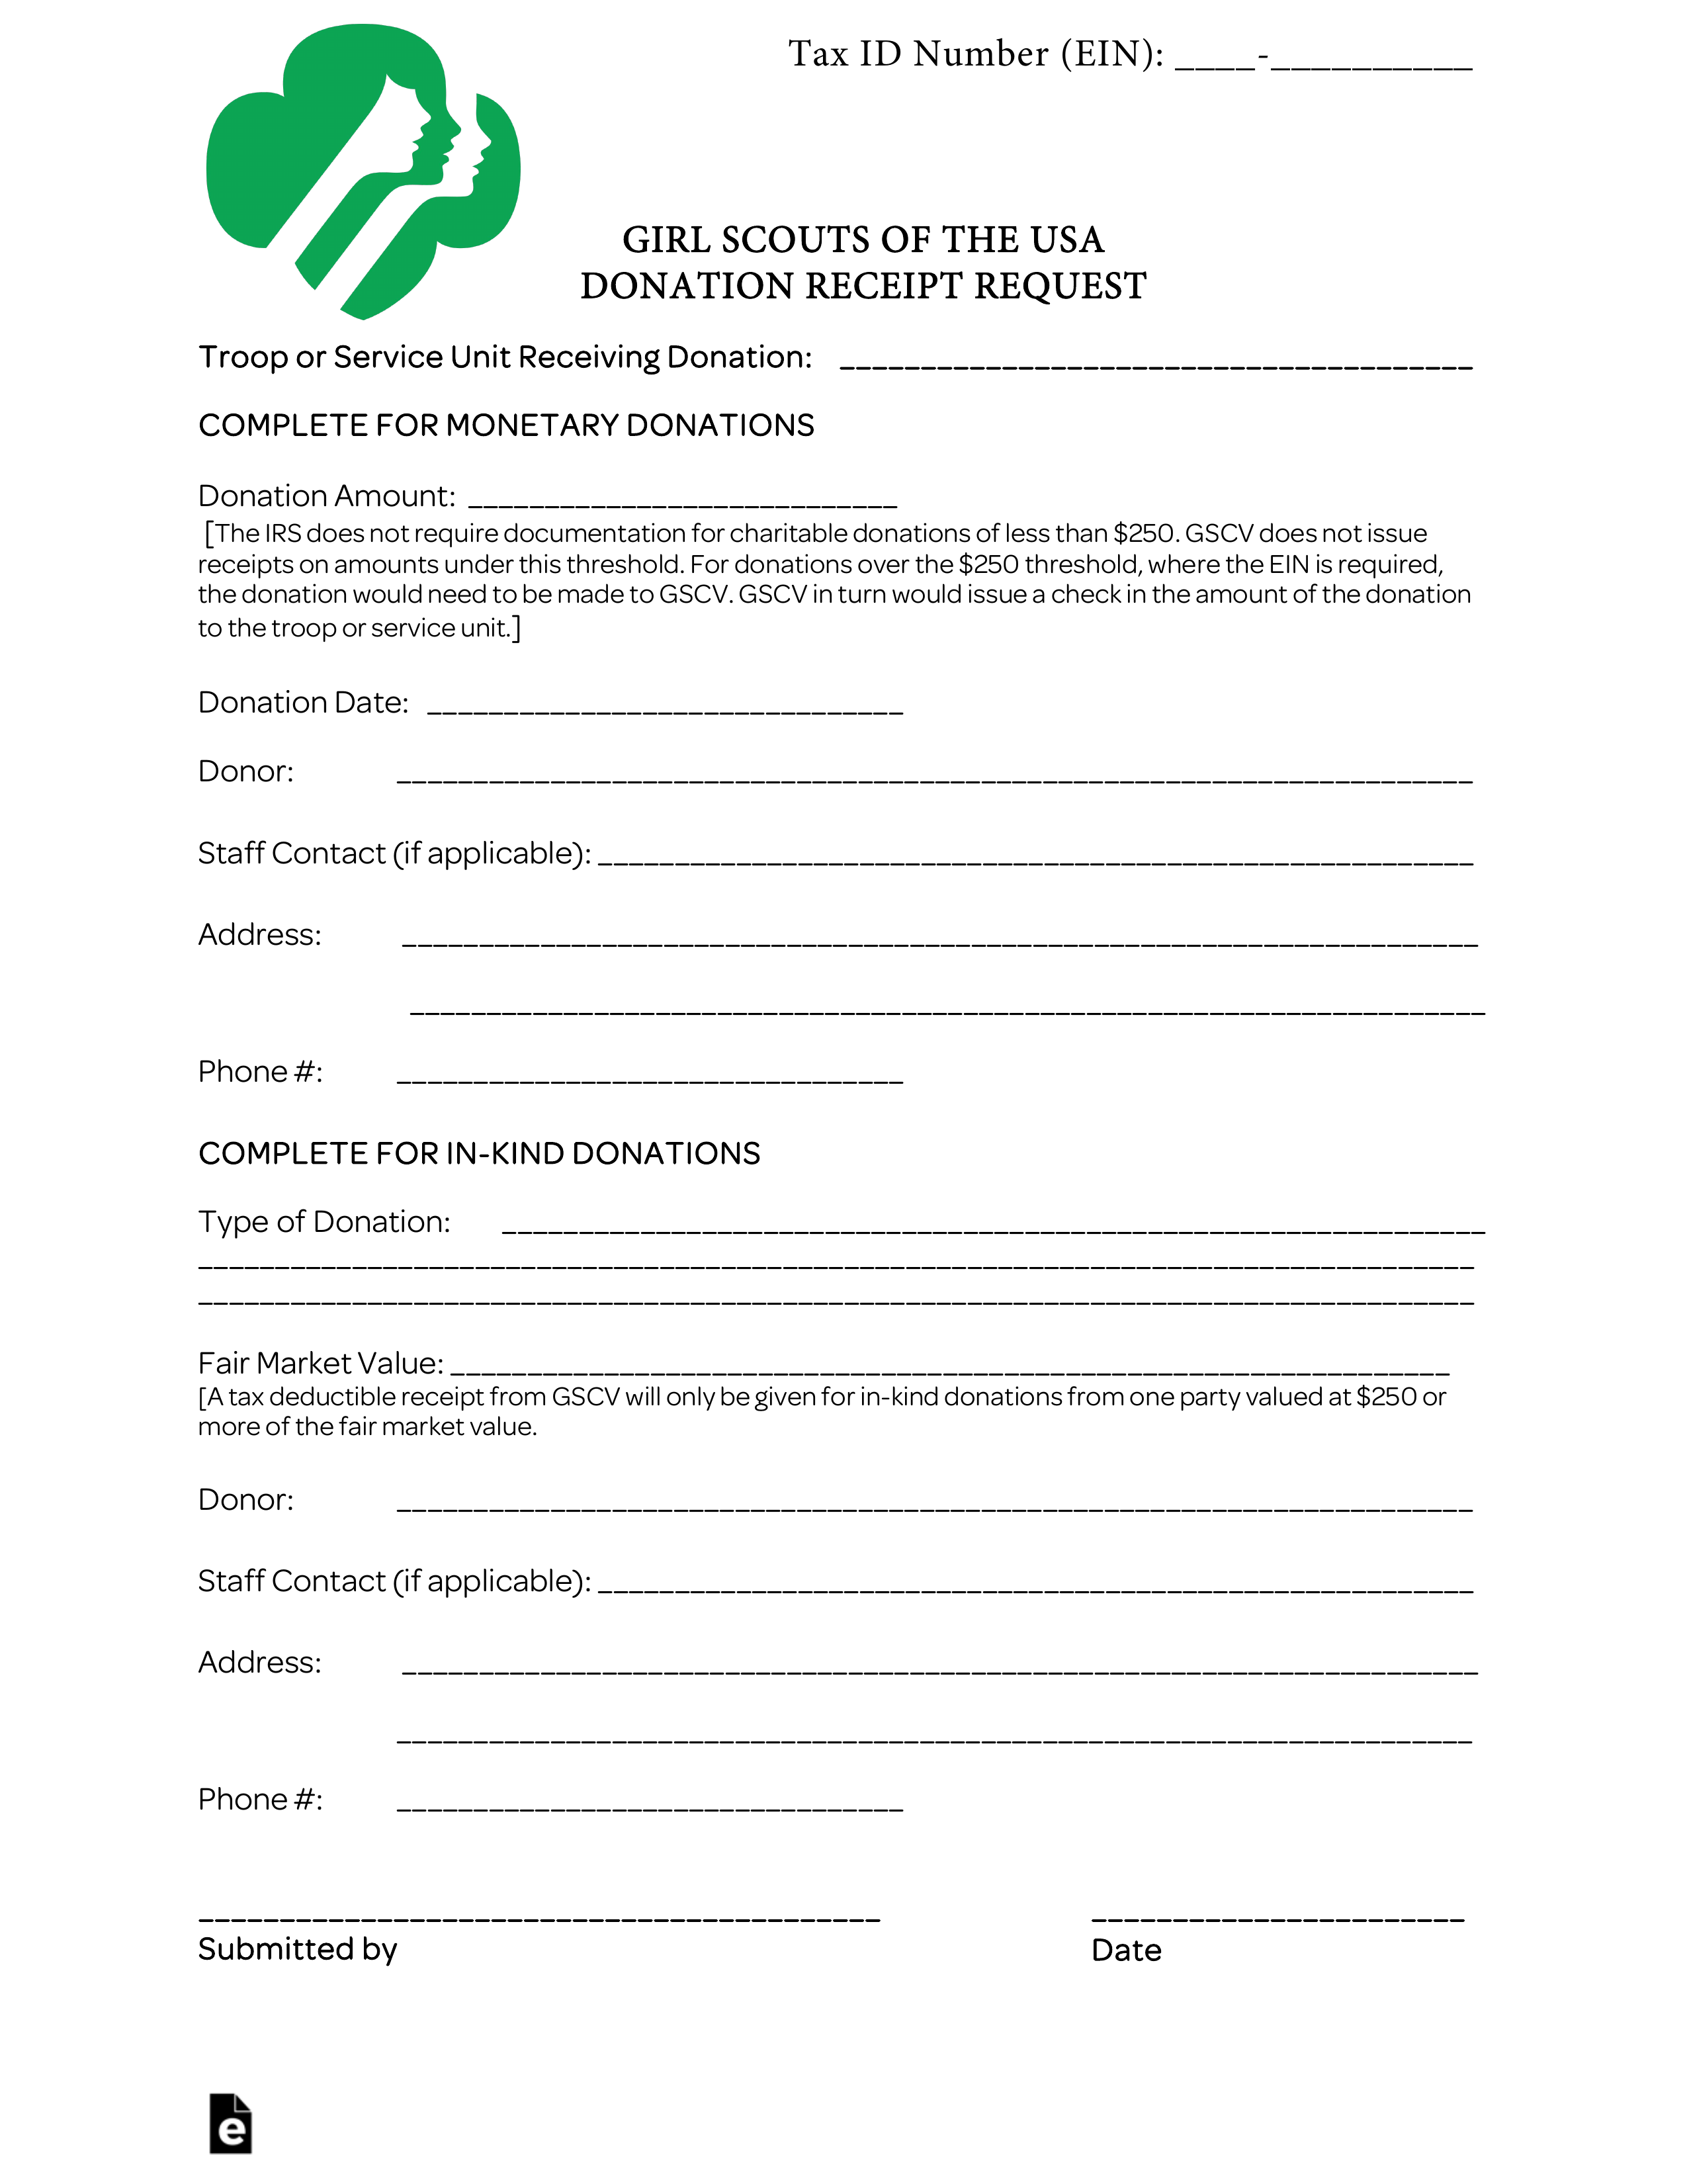 Girl Scouts of the USA Donation Receipt Template